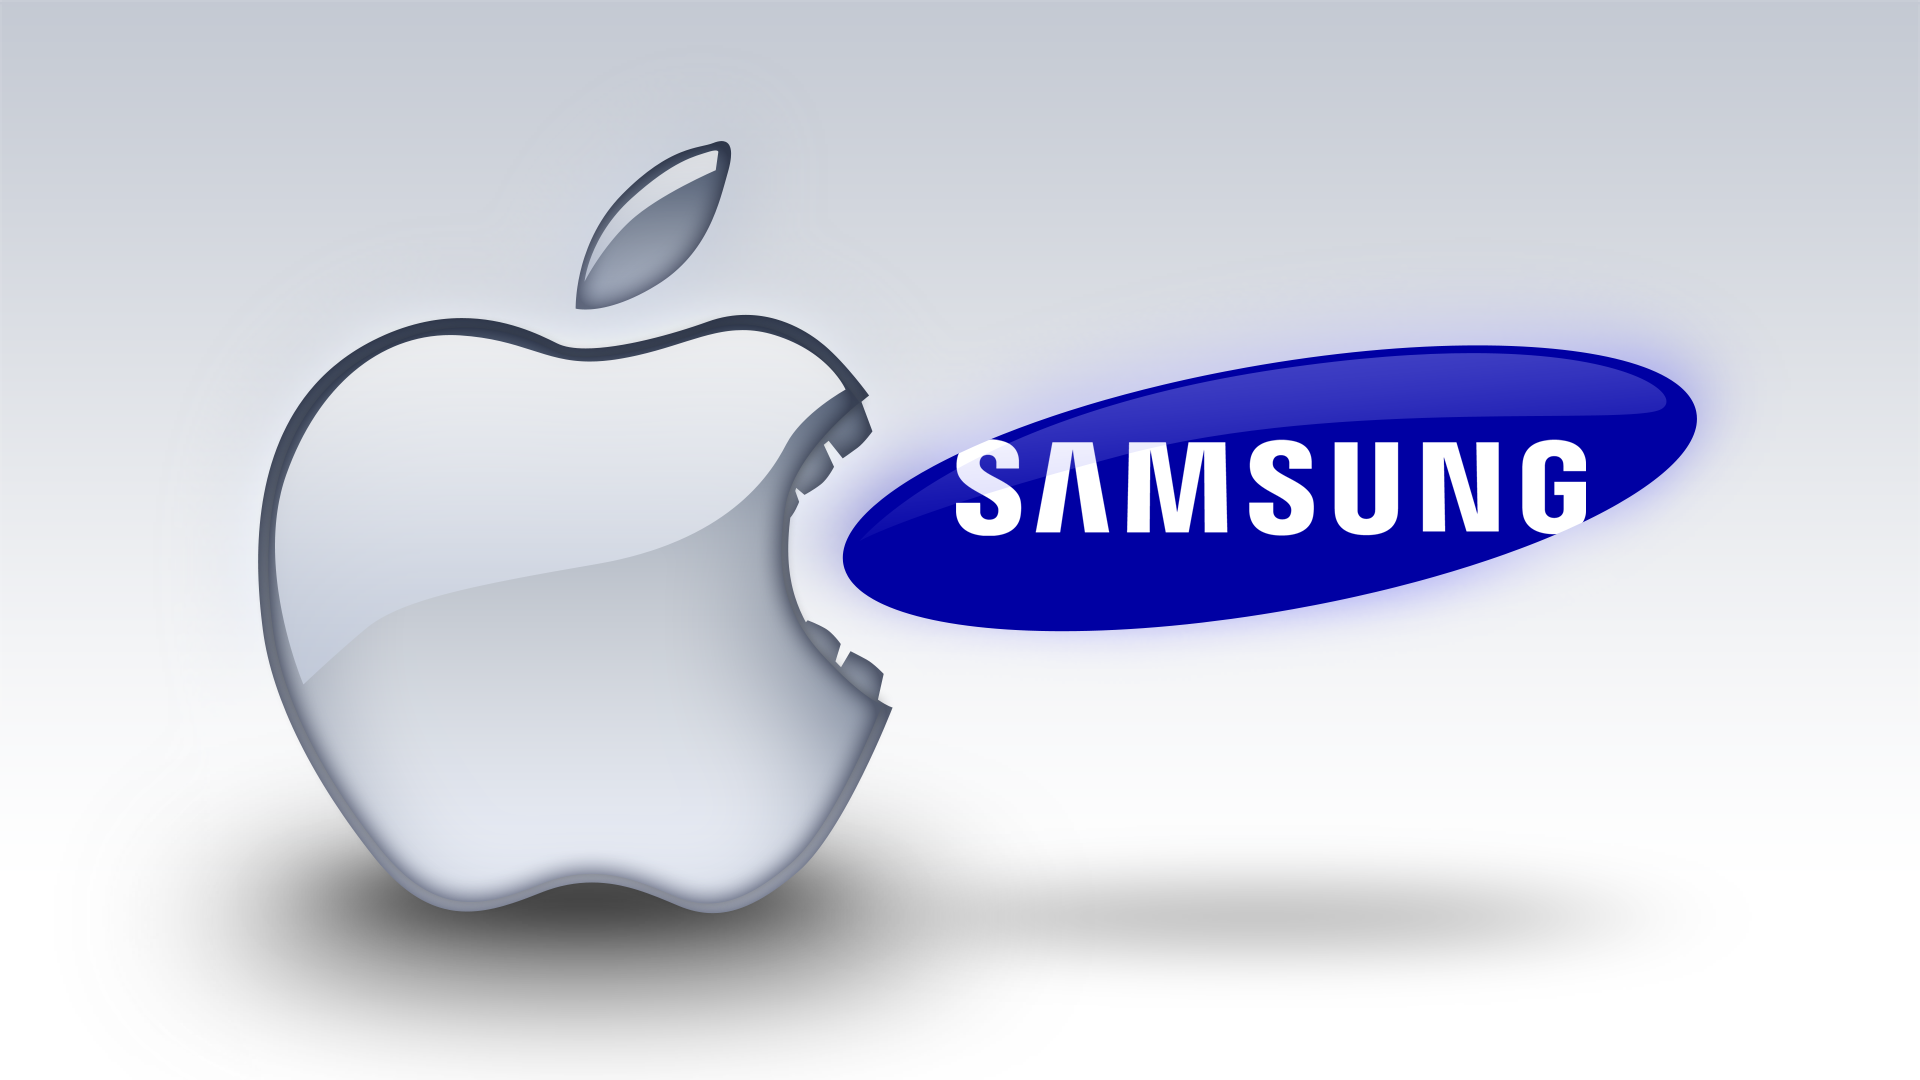 apple vs. samsung financing intro - Sony Becomes World’s Third Largest Smartphone Maker